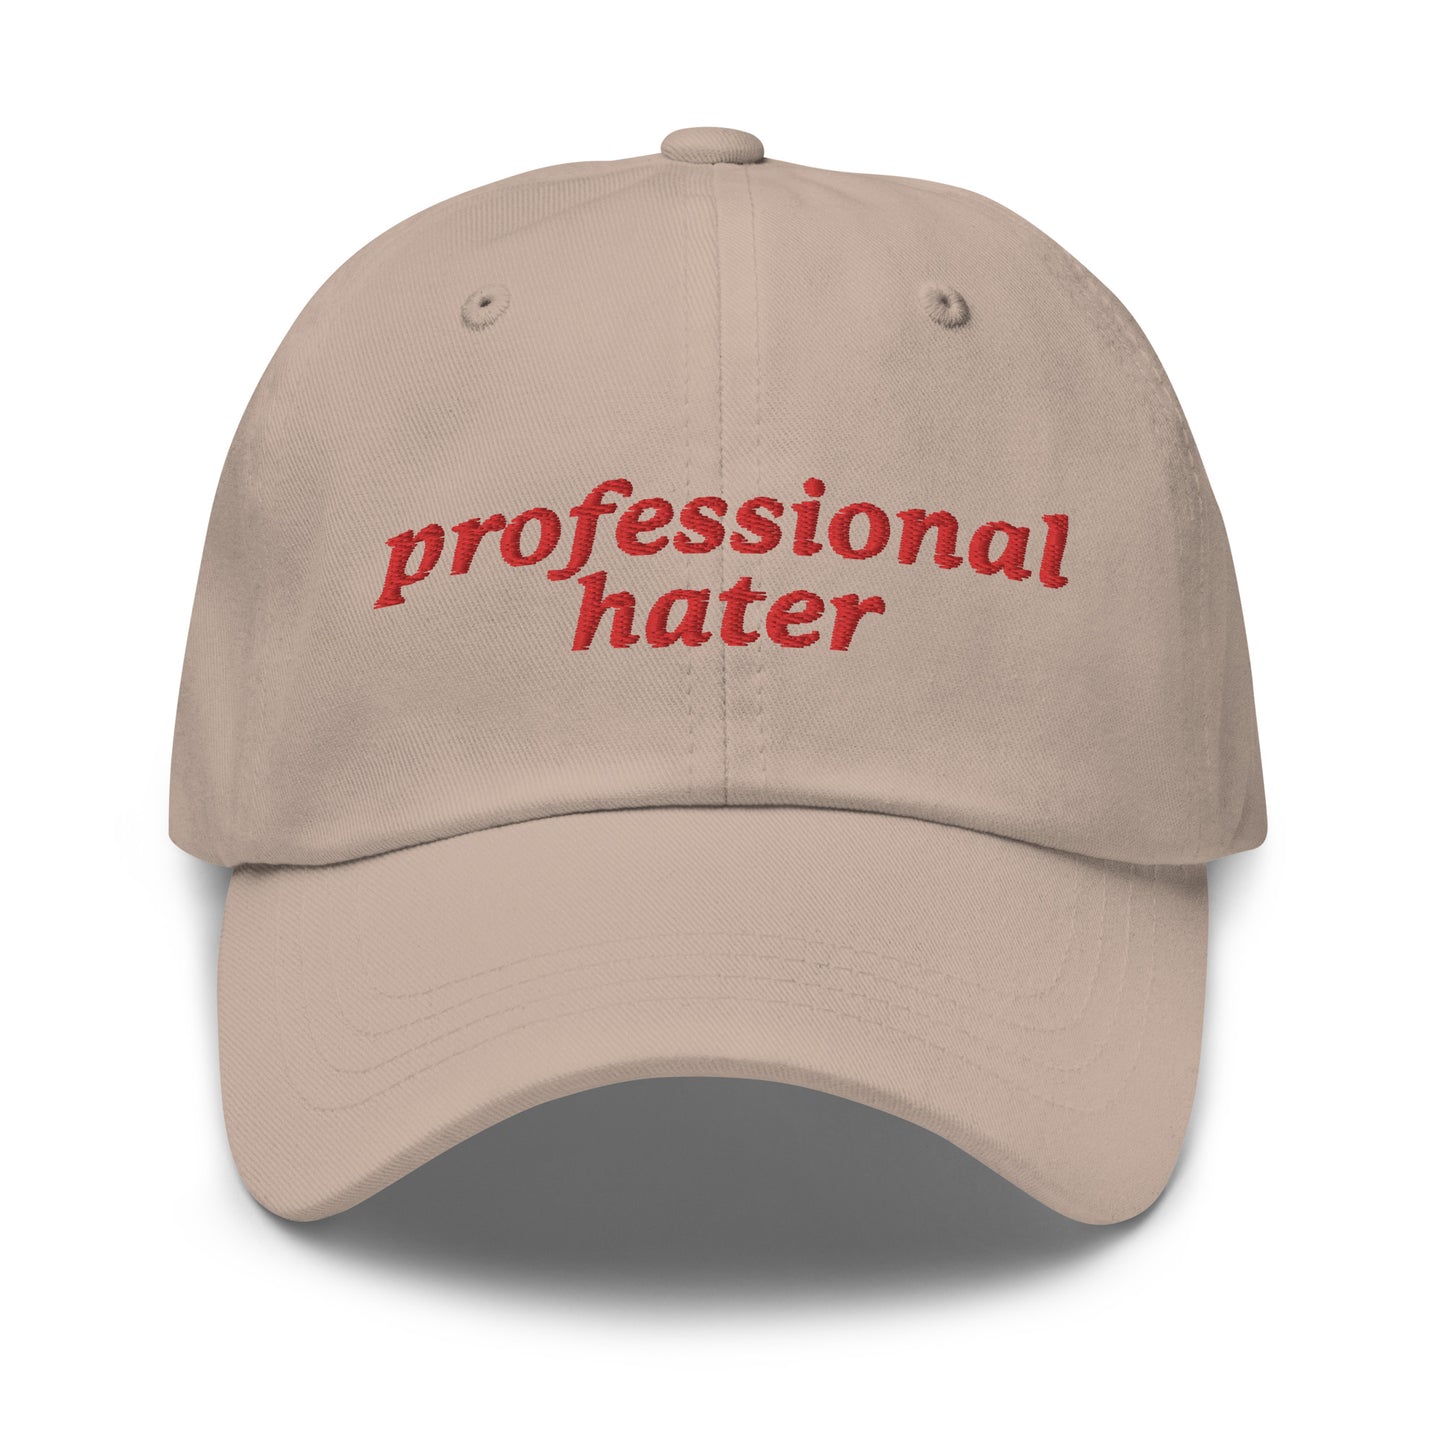 Professional Hater hat